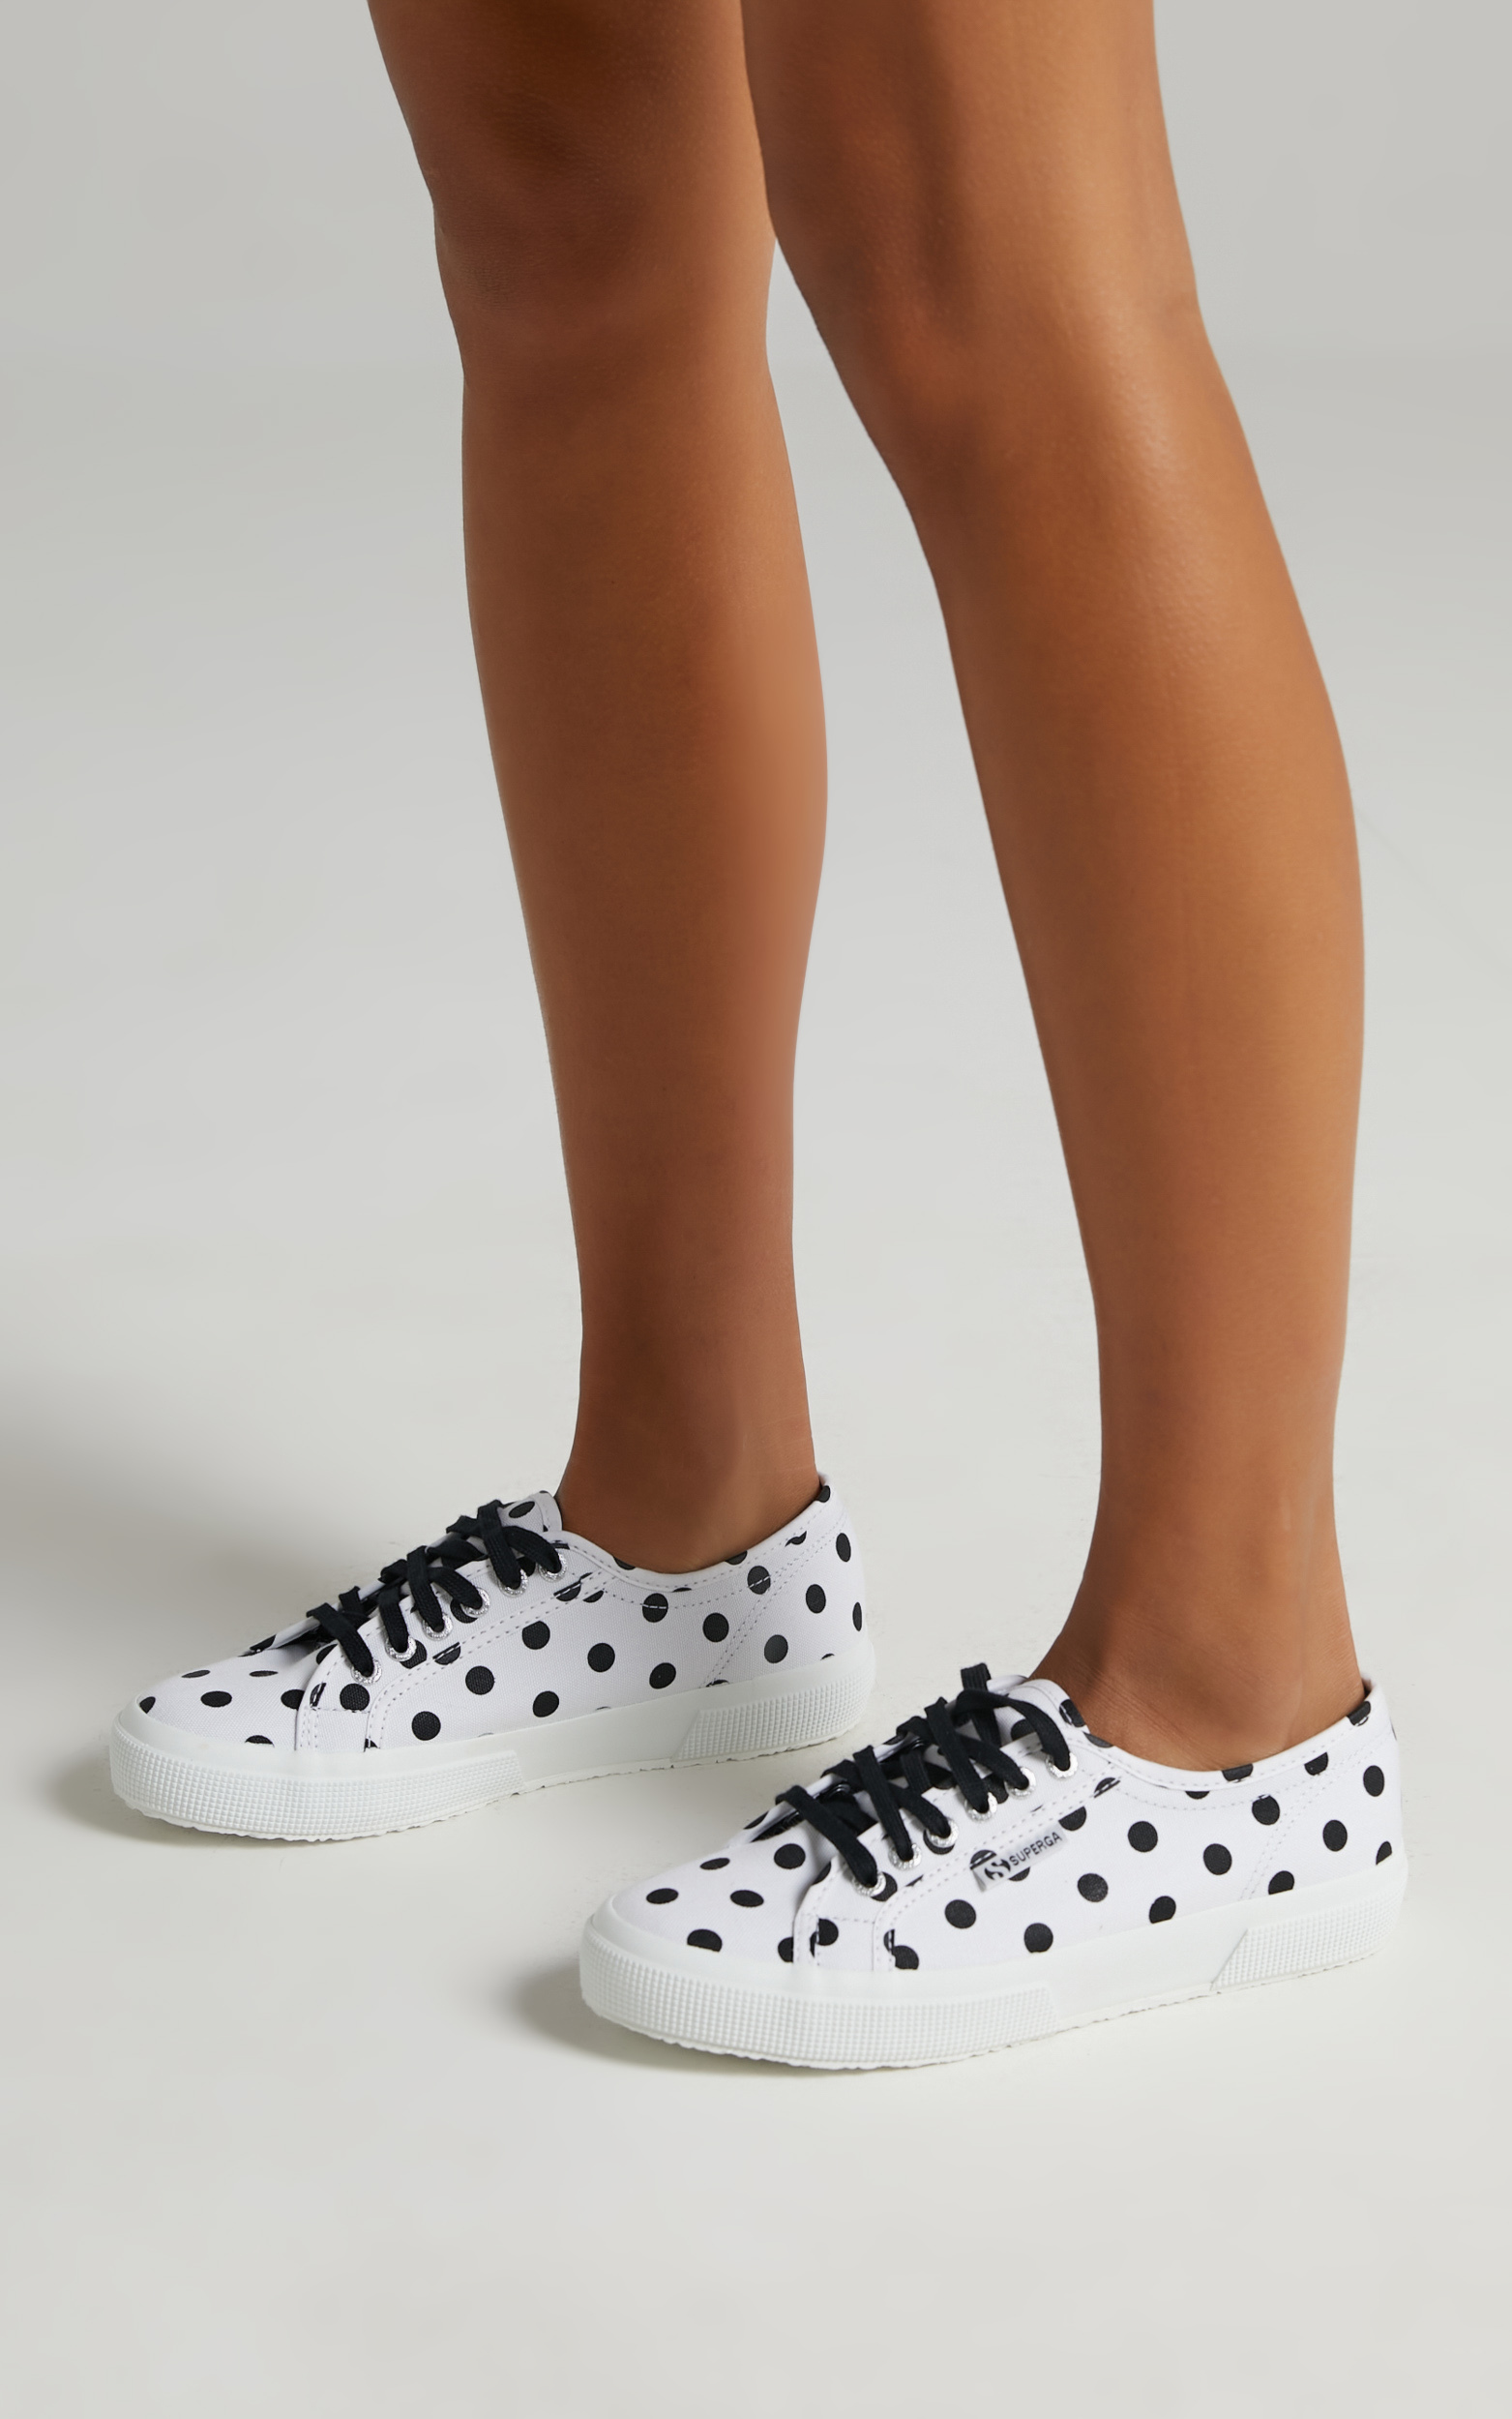 Superga - 2750 Polkadots Sneakers in A3Y White Black Dots - 05, WHT1, hi-res image number null